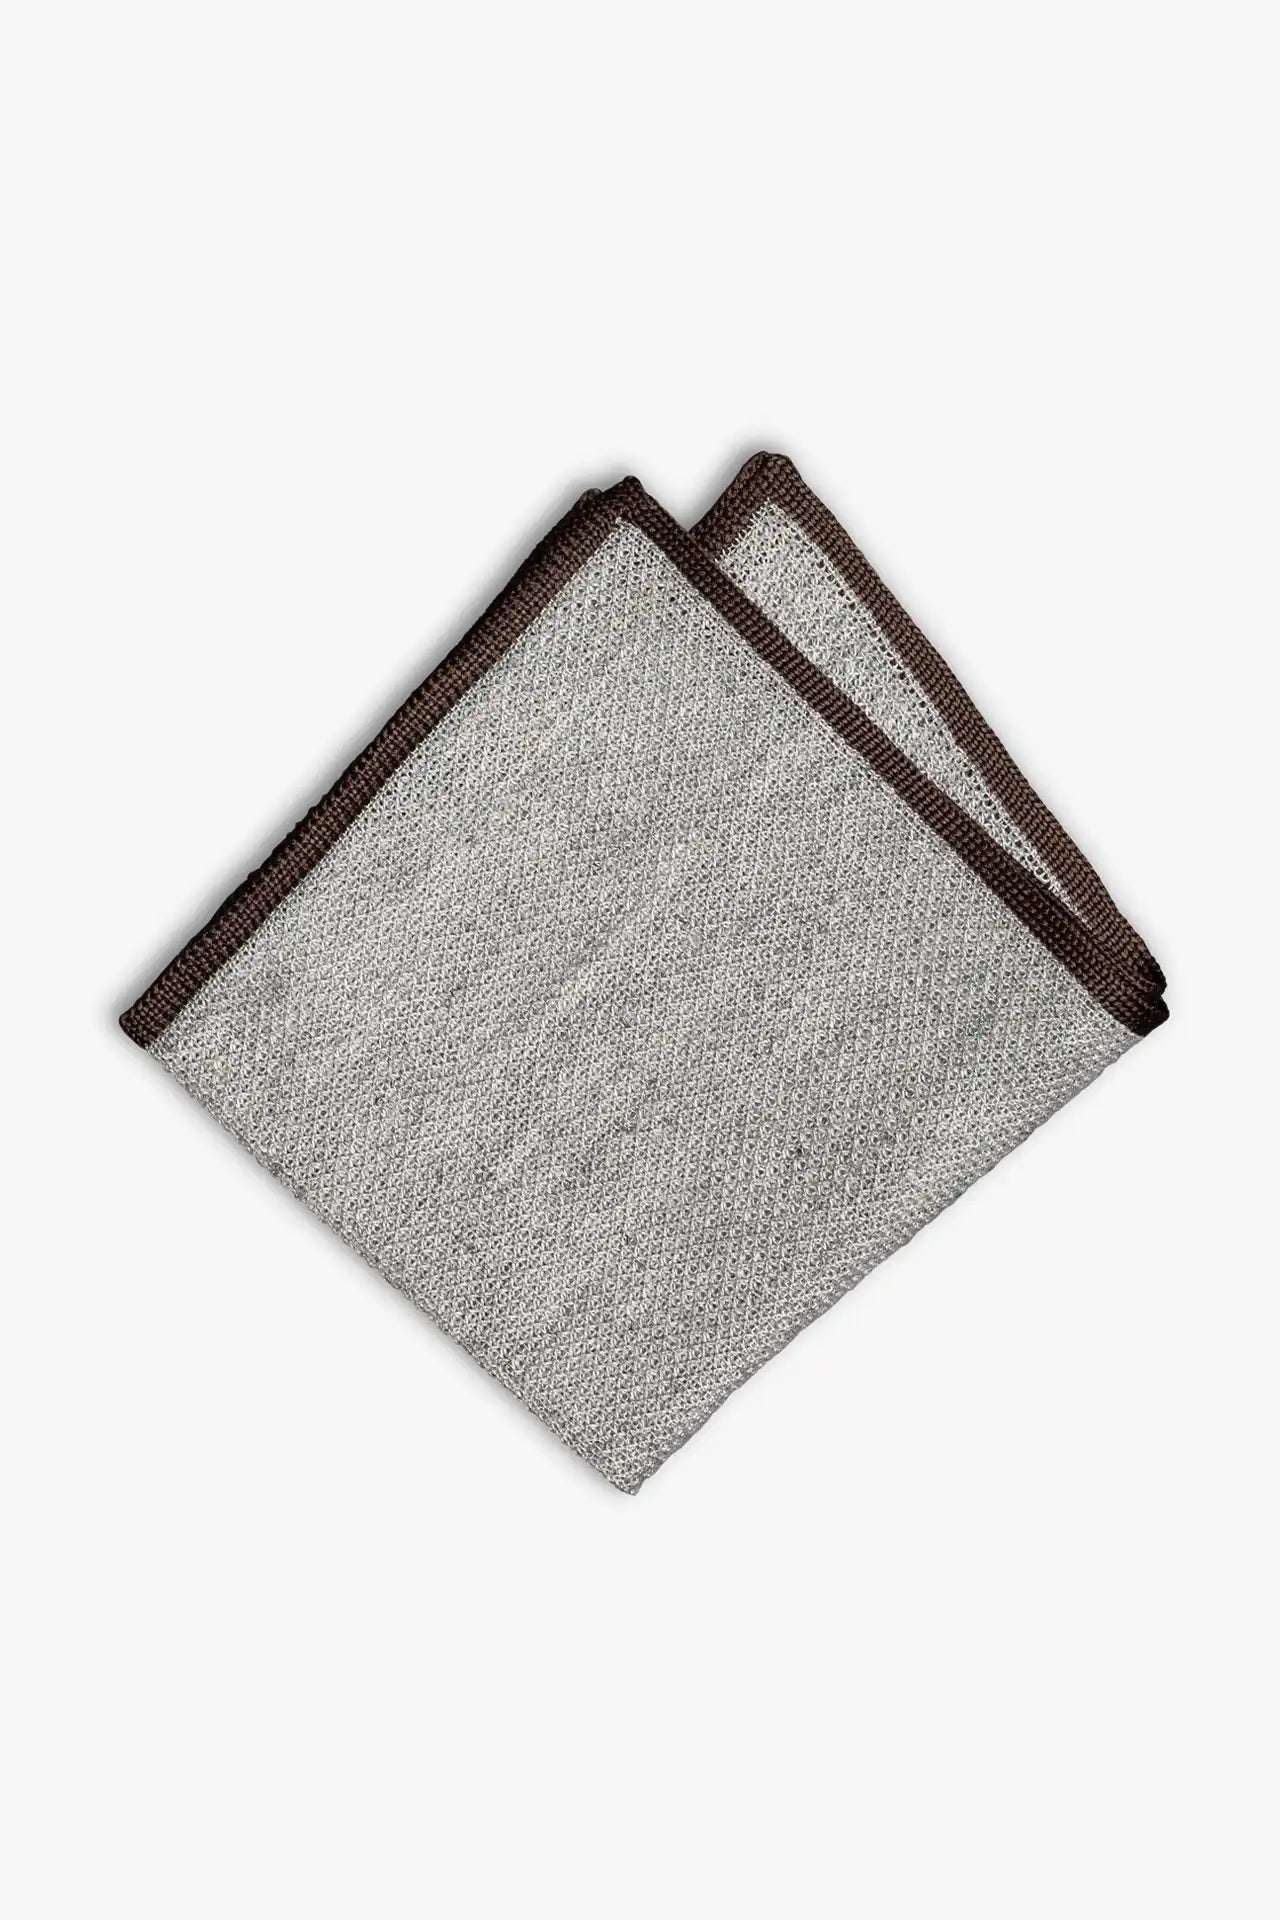 Gray knitted pocket square with brown boarder. Made of silk in Italy.